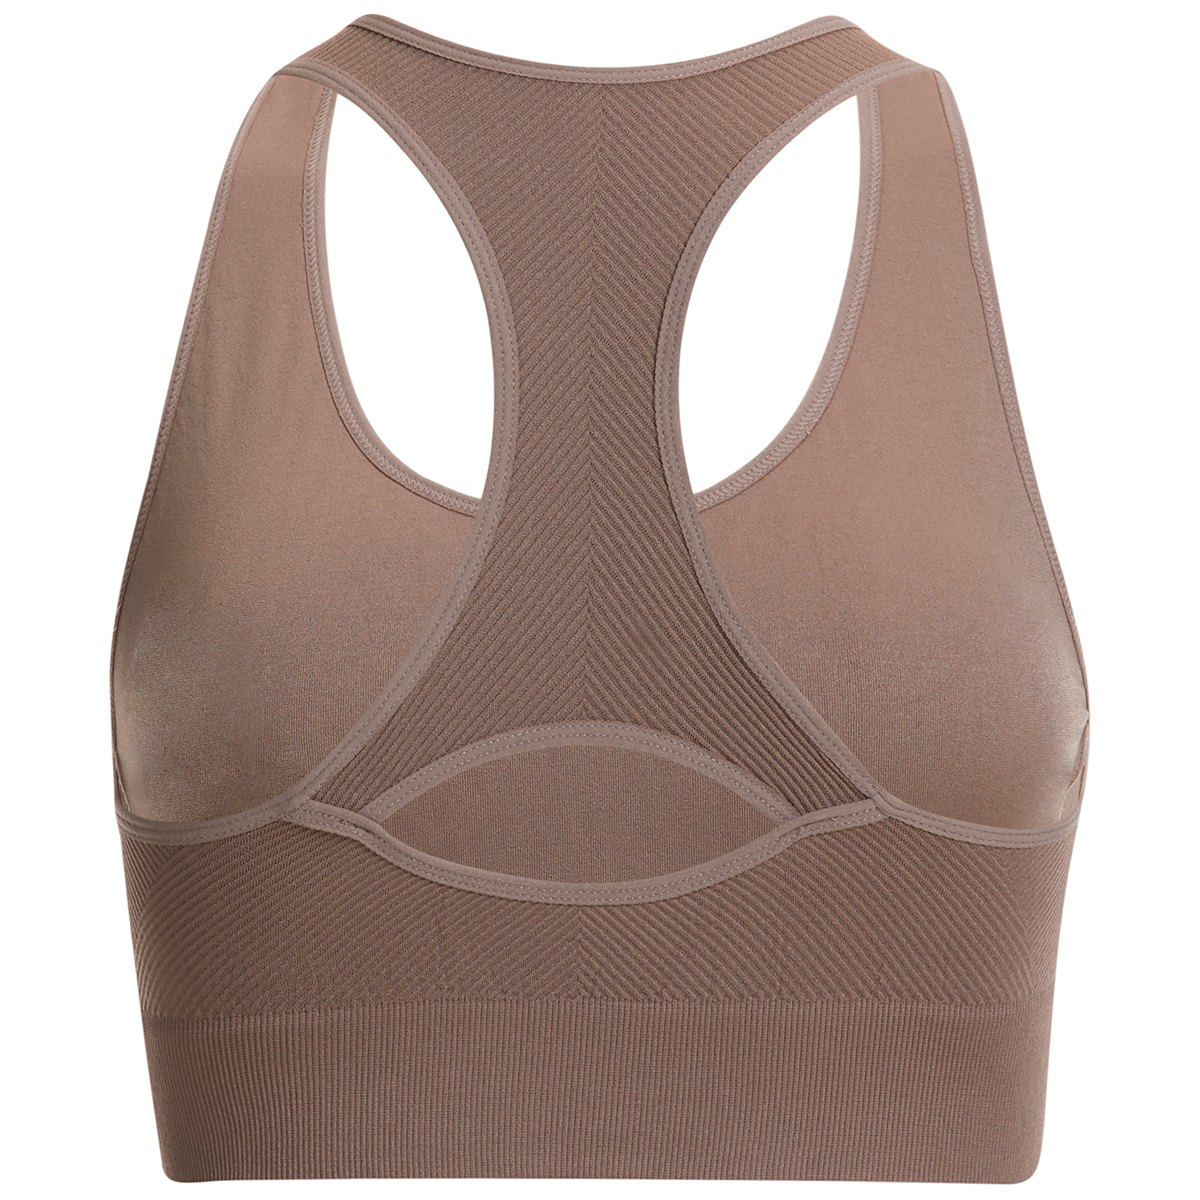 RBX Women's Seamless Sports Bra w/ Cut Out Back, 2 Pack - Bob's Stores